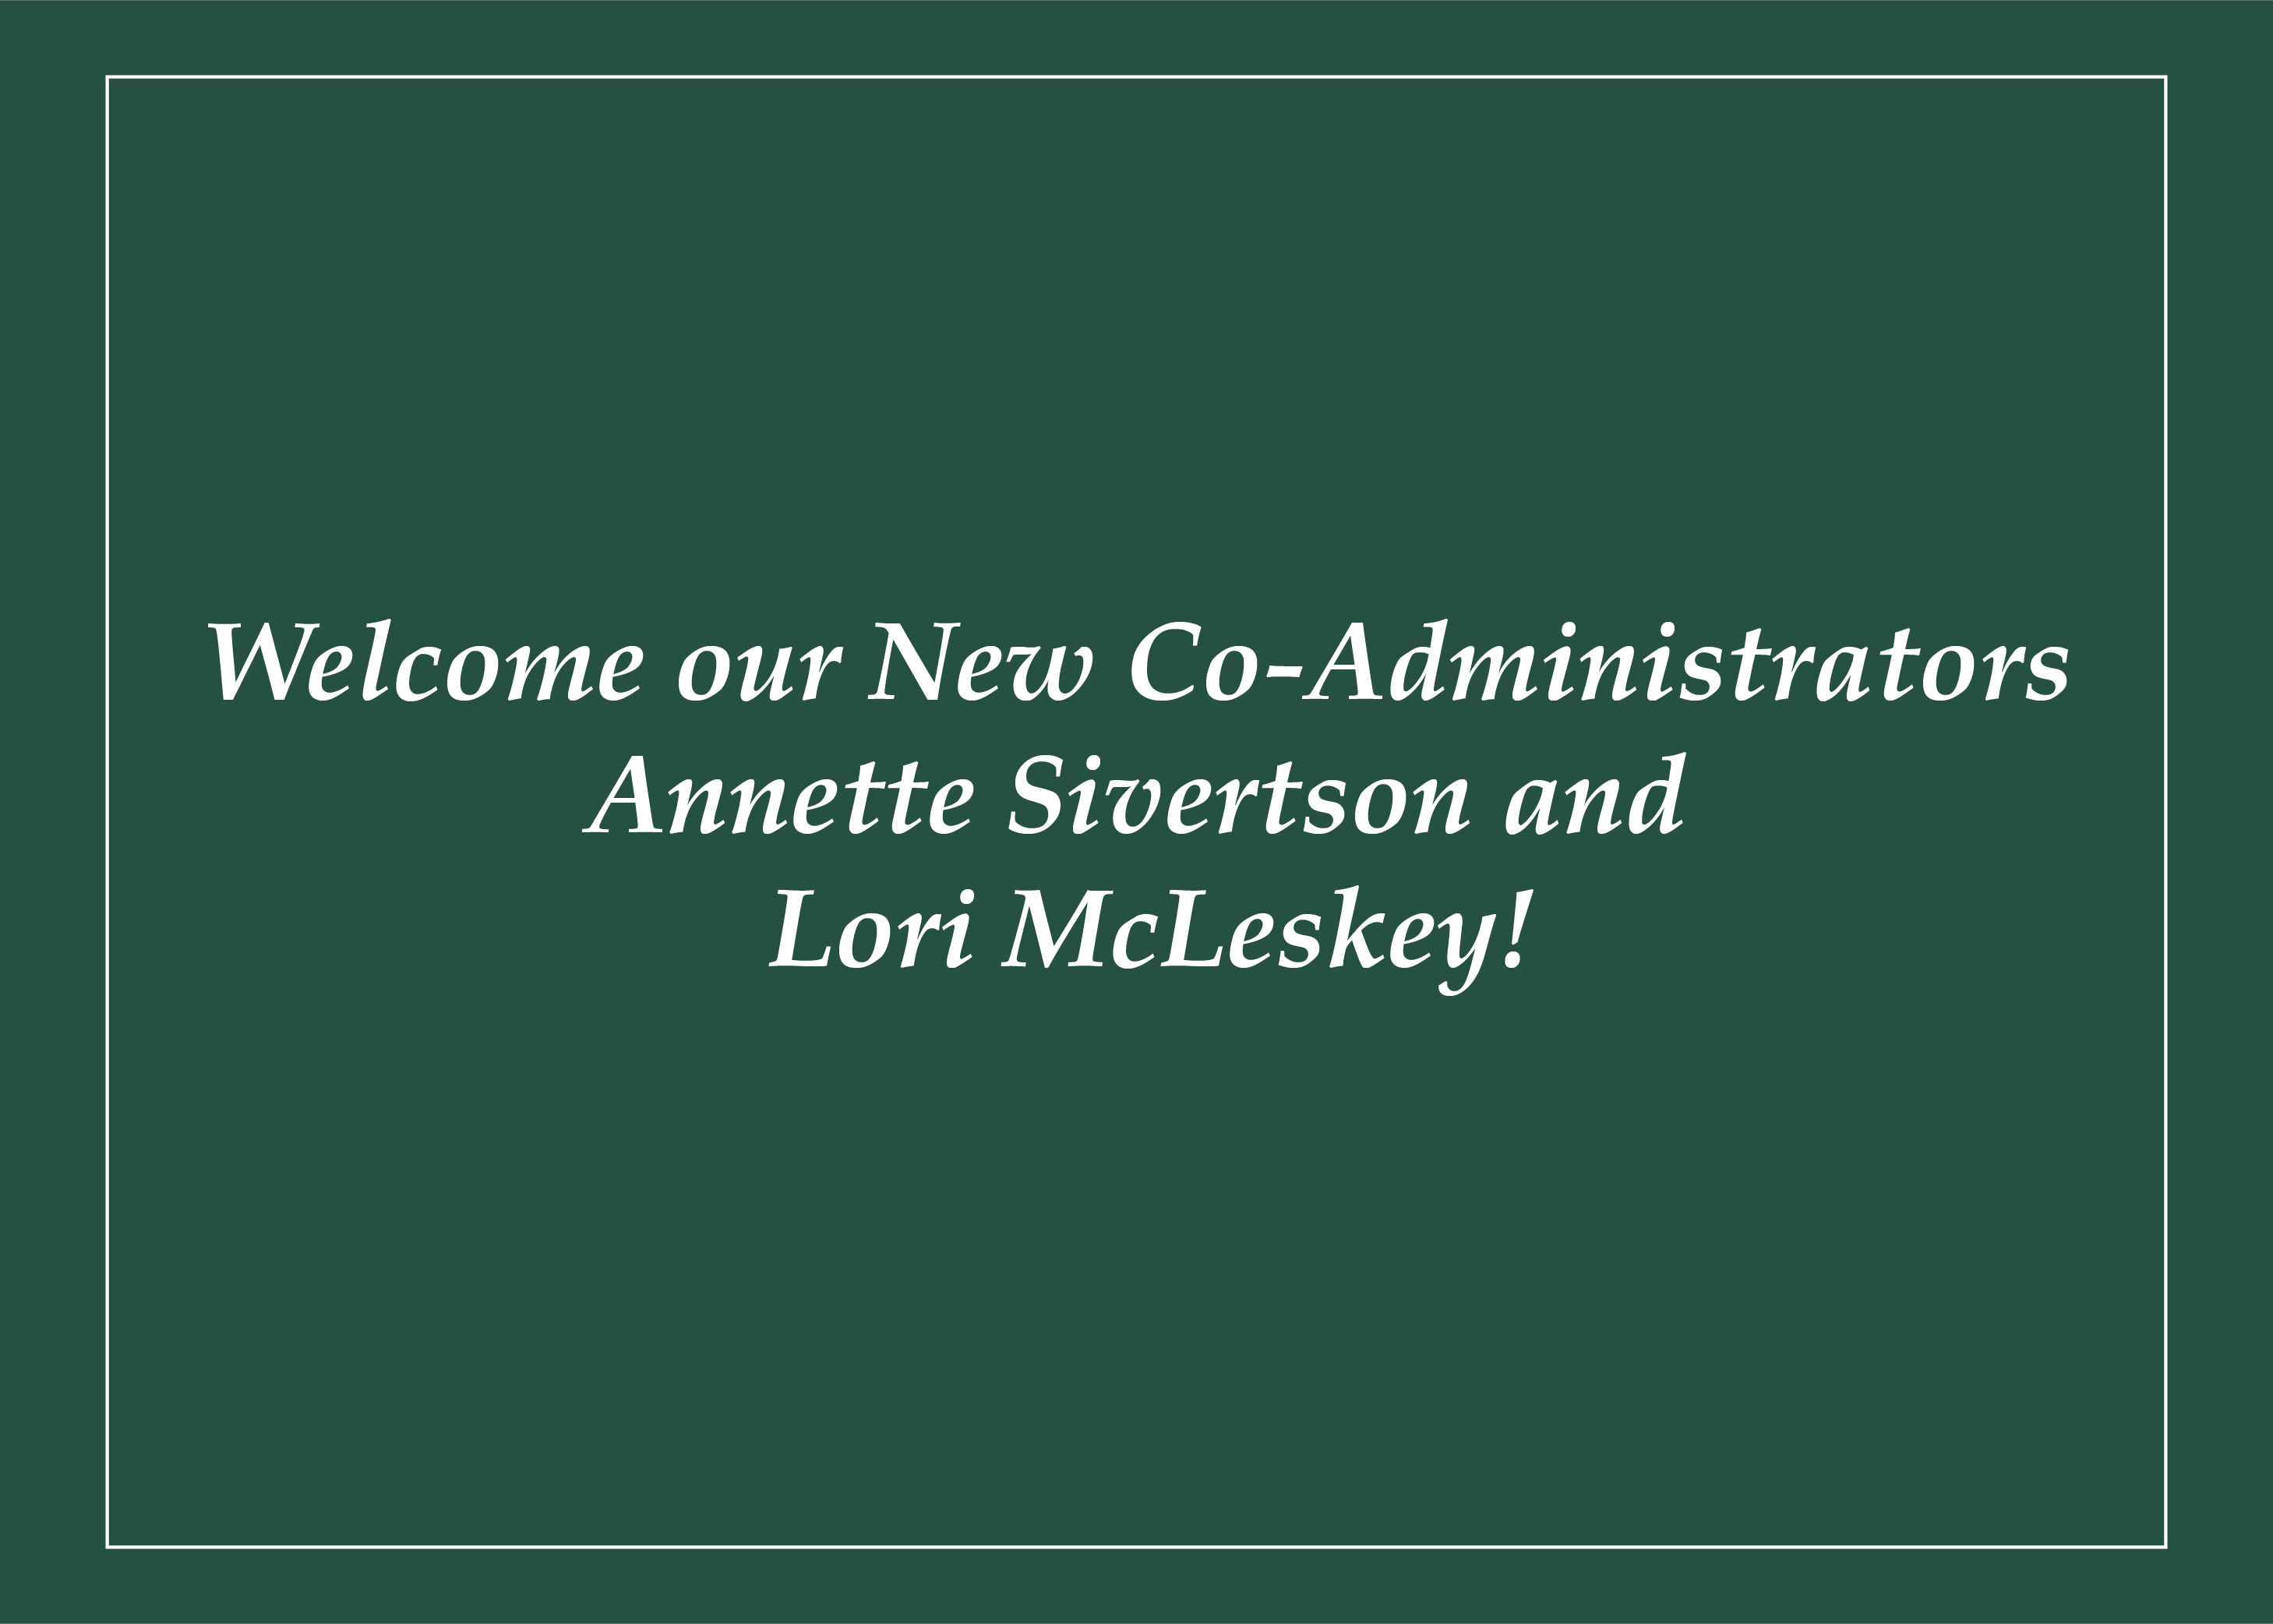 Welcome our New Co-Administrators, Annette Sivertson and Lori McLeskey!